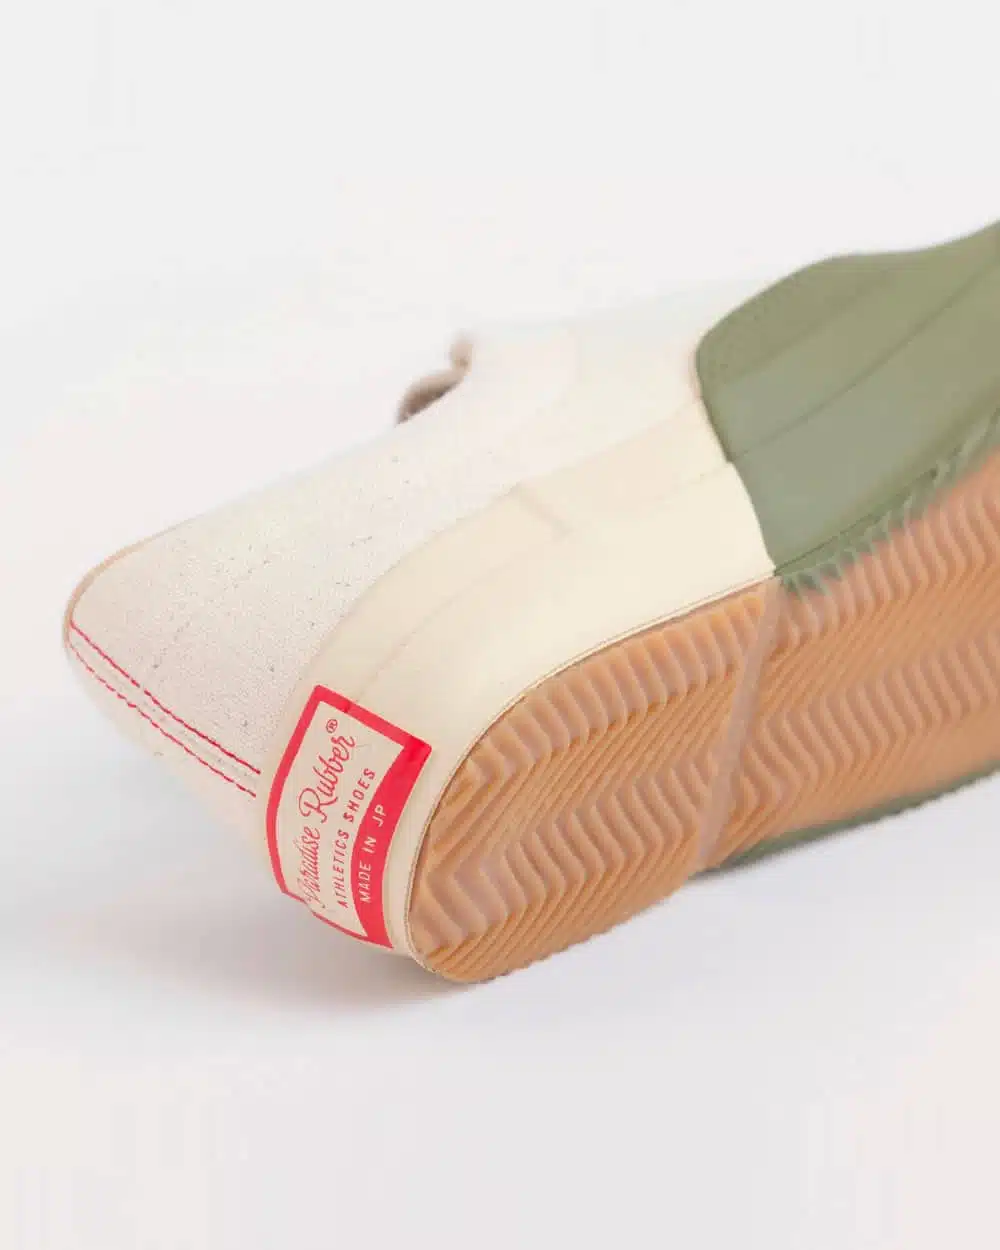 PRAS Shellcap Deck Sneakers Hand Painted - Olive/Off White